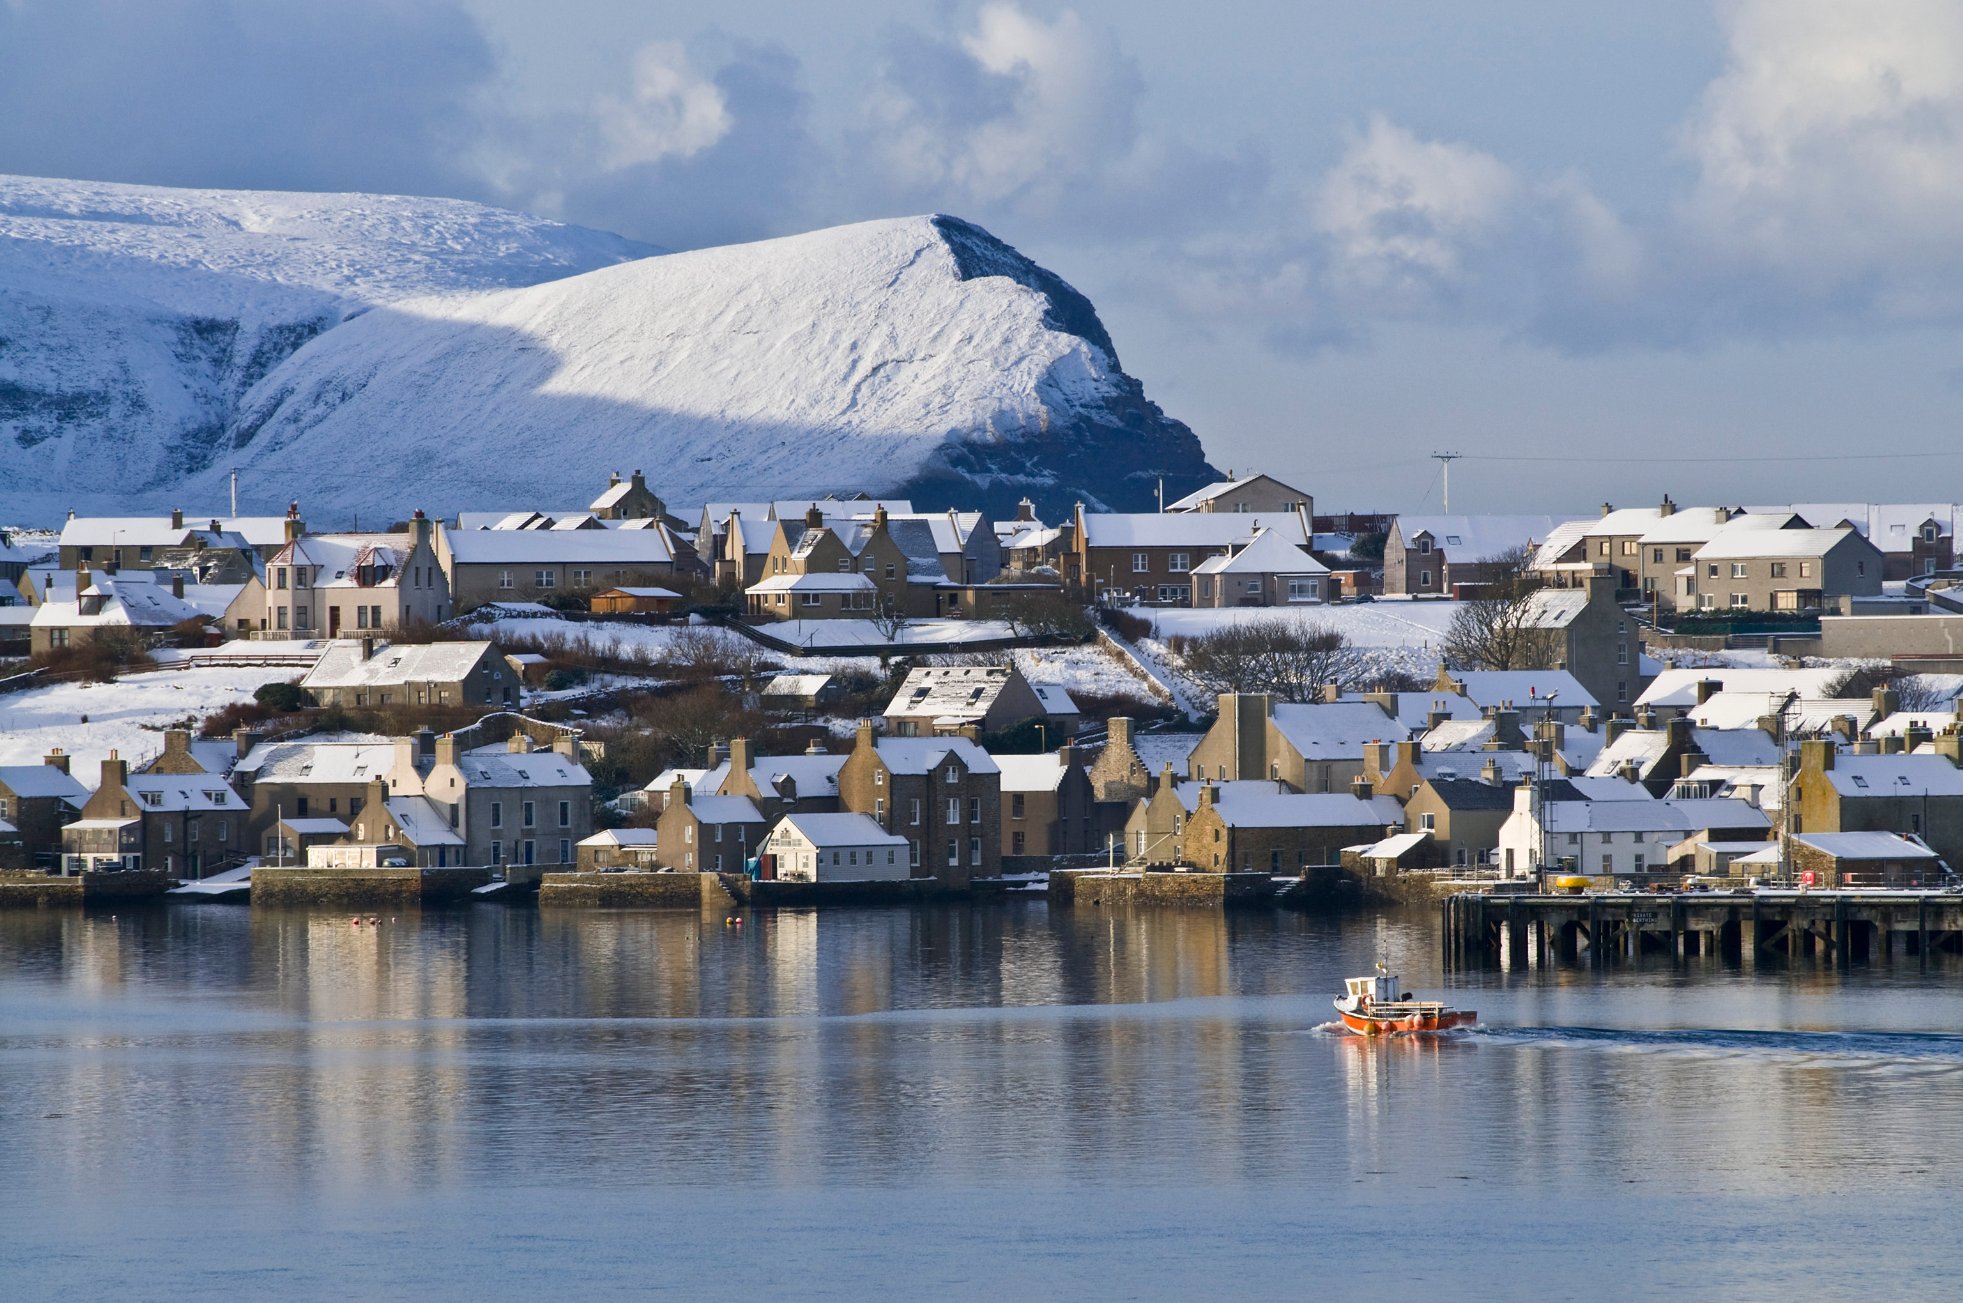 Stromness in the snow - image by Doug Houghton